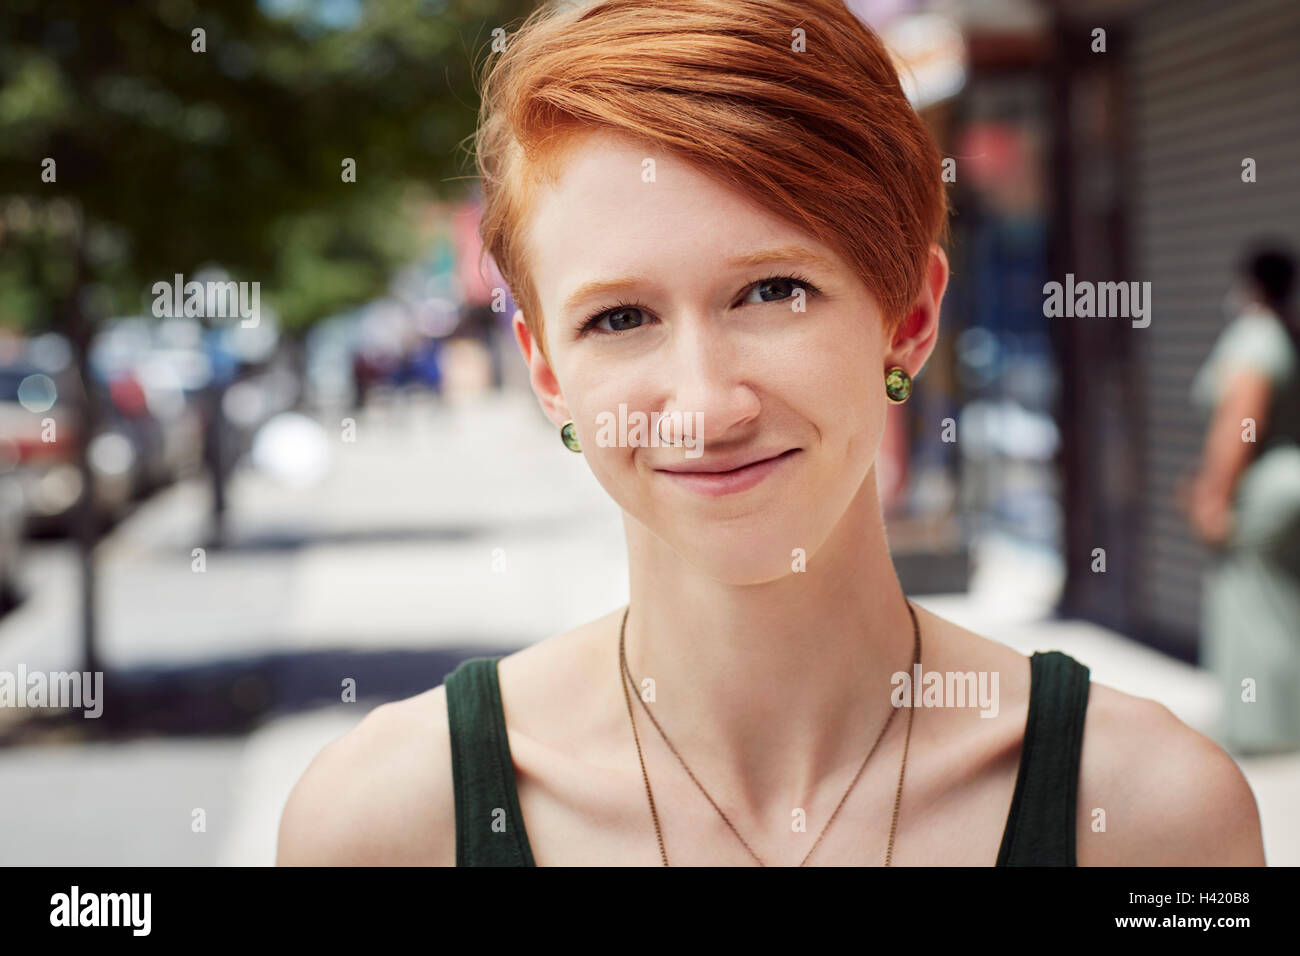 Caucasian woman with nose ring smiling on city sidewalk Stock Photo